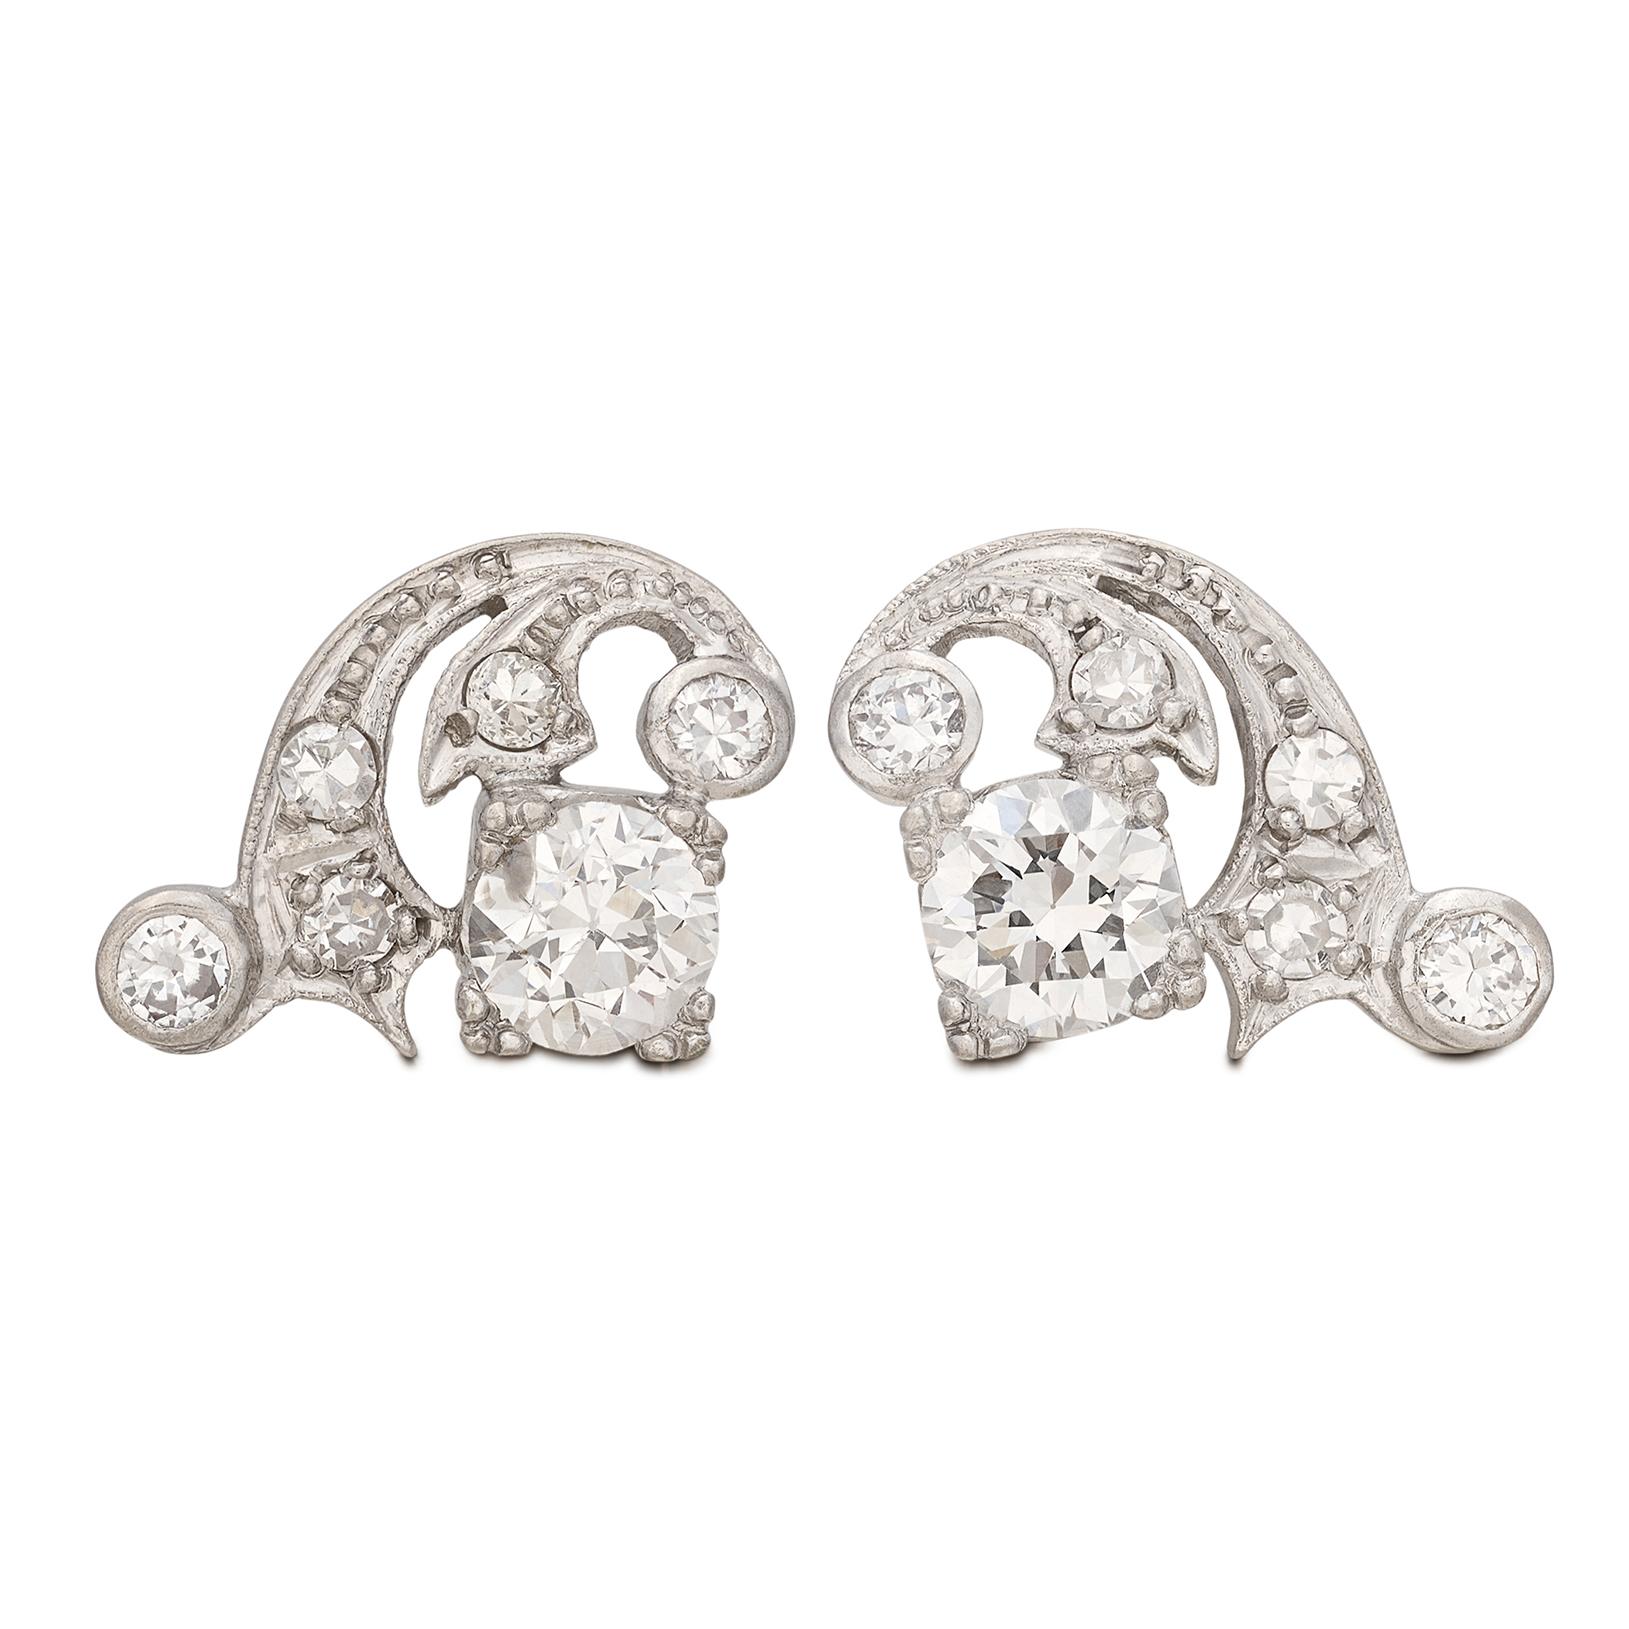 Estate Art Deco Platinum Diamond Earrings In Excellent Condition For Sale In San Francisco, CA